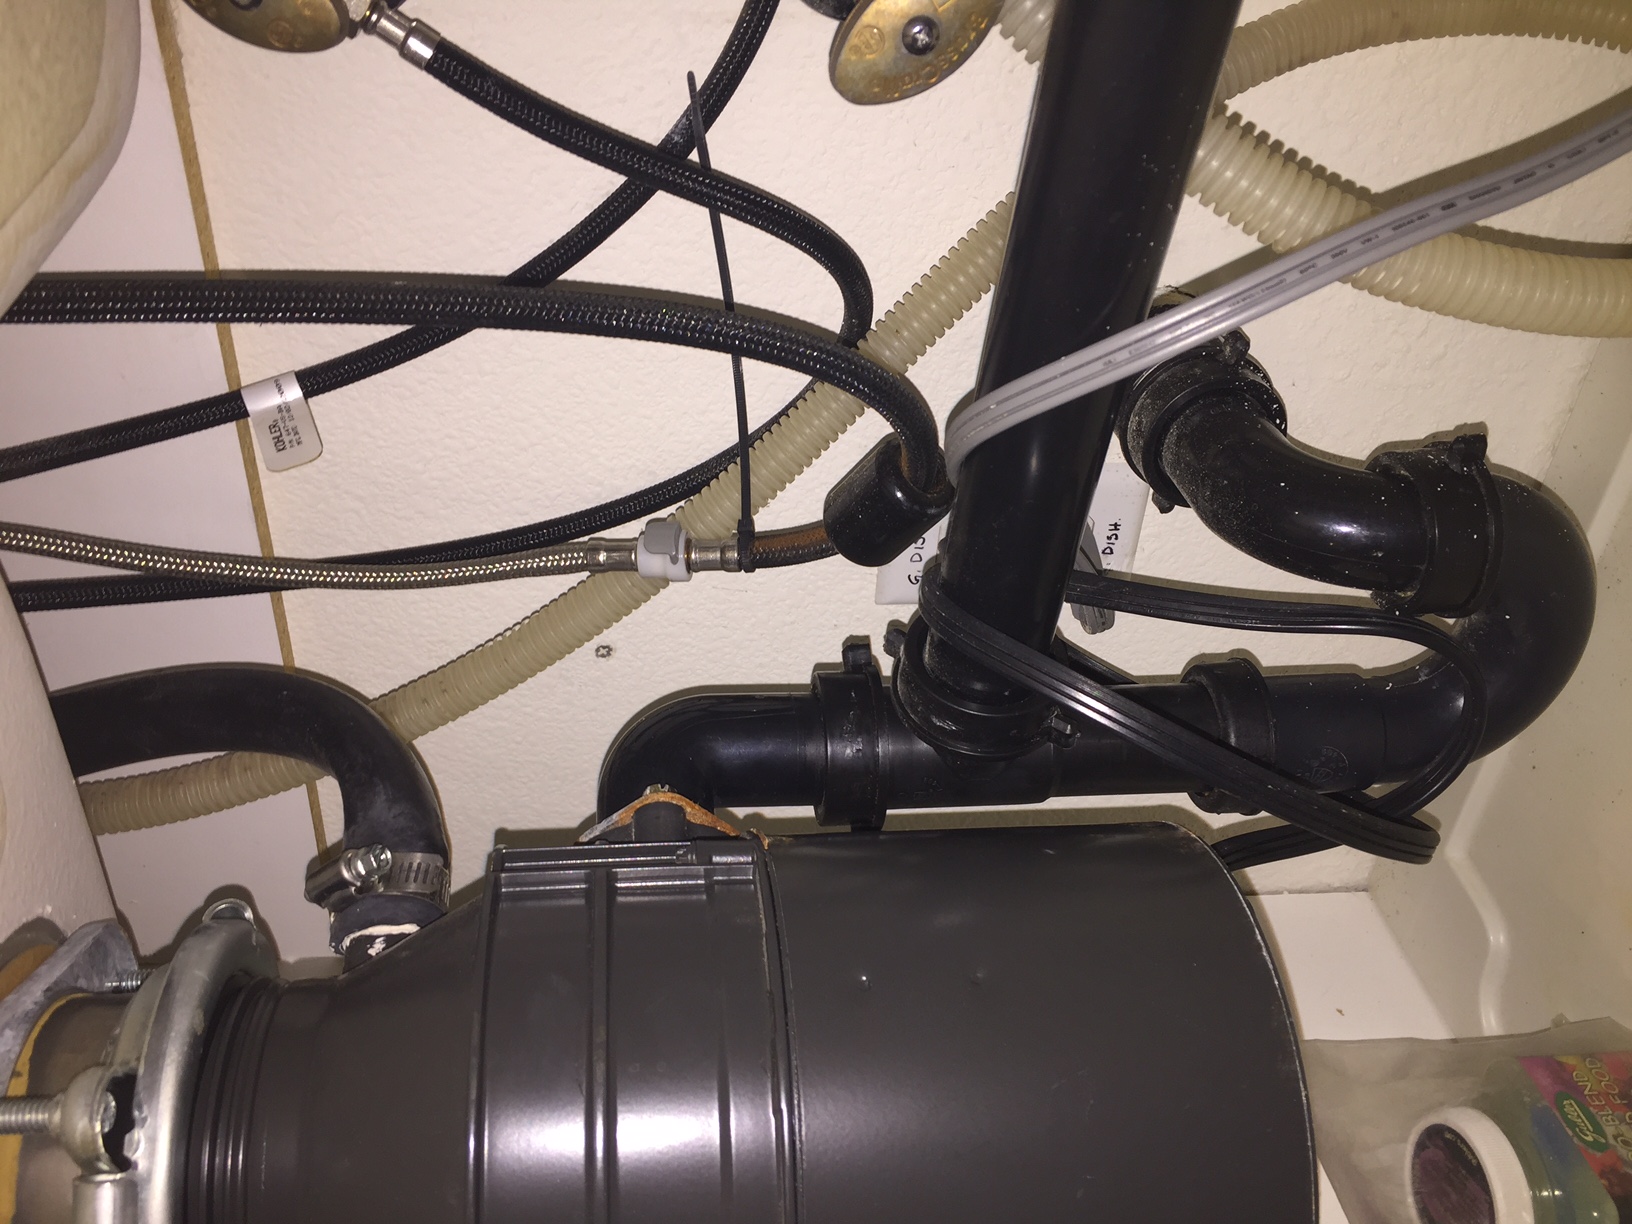 Sewage smell from dishwasher help pool drain sink smells